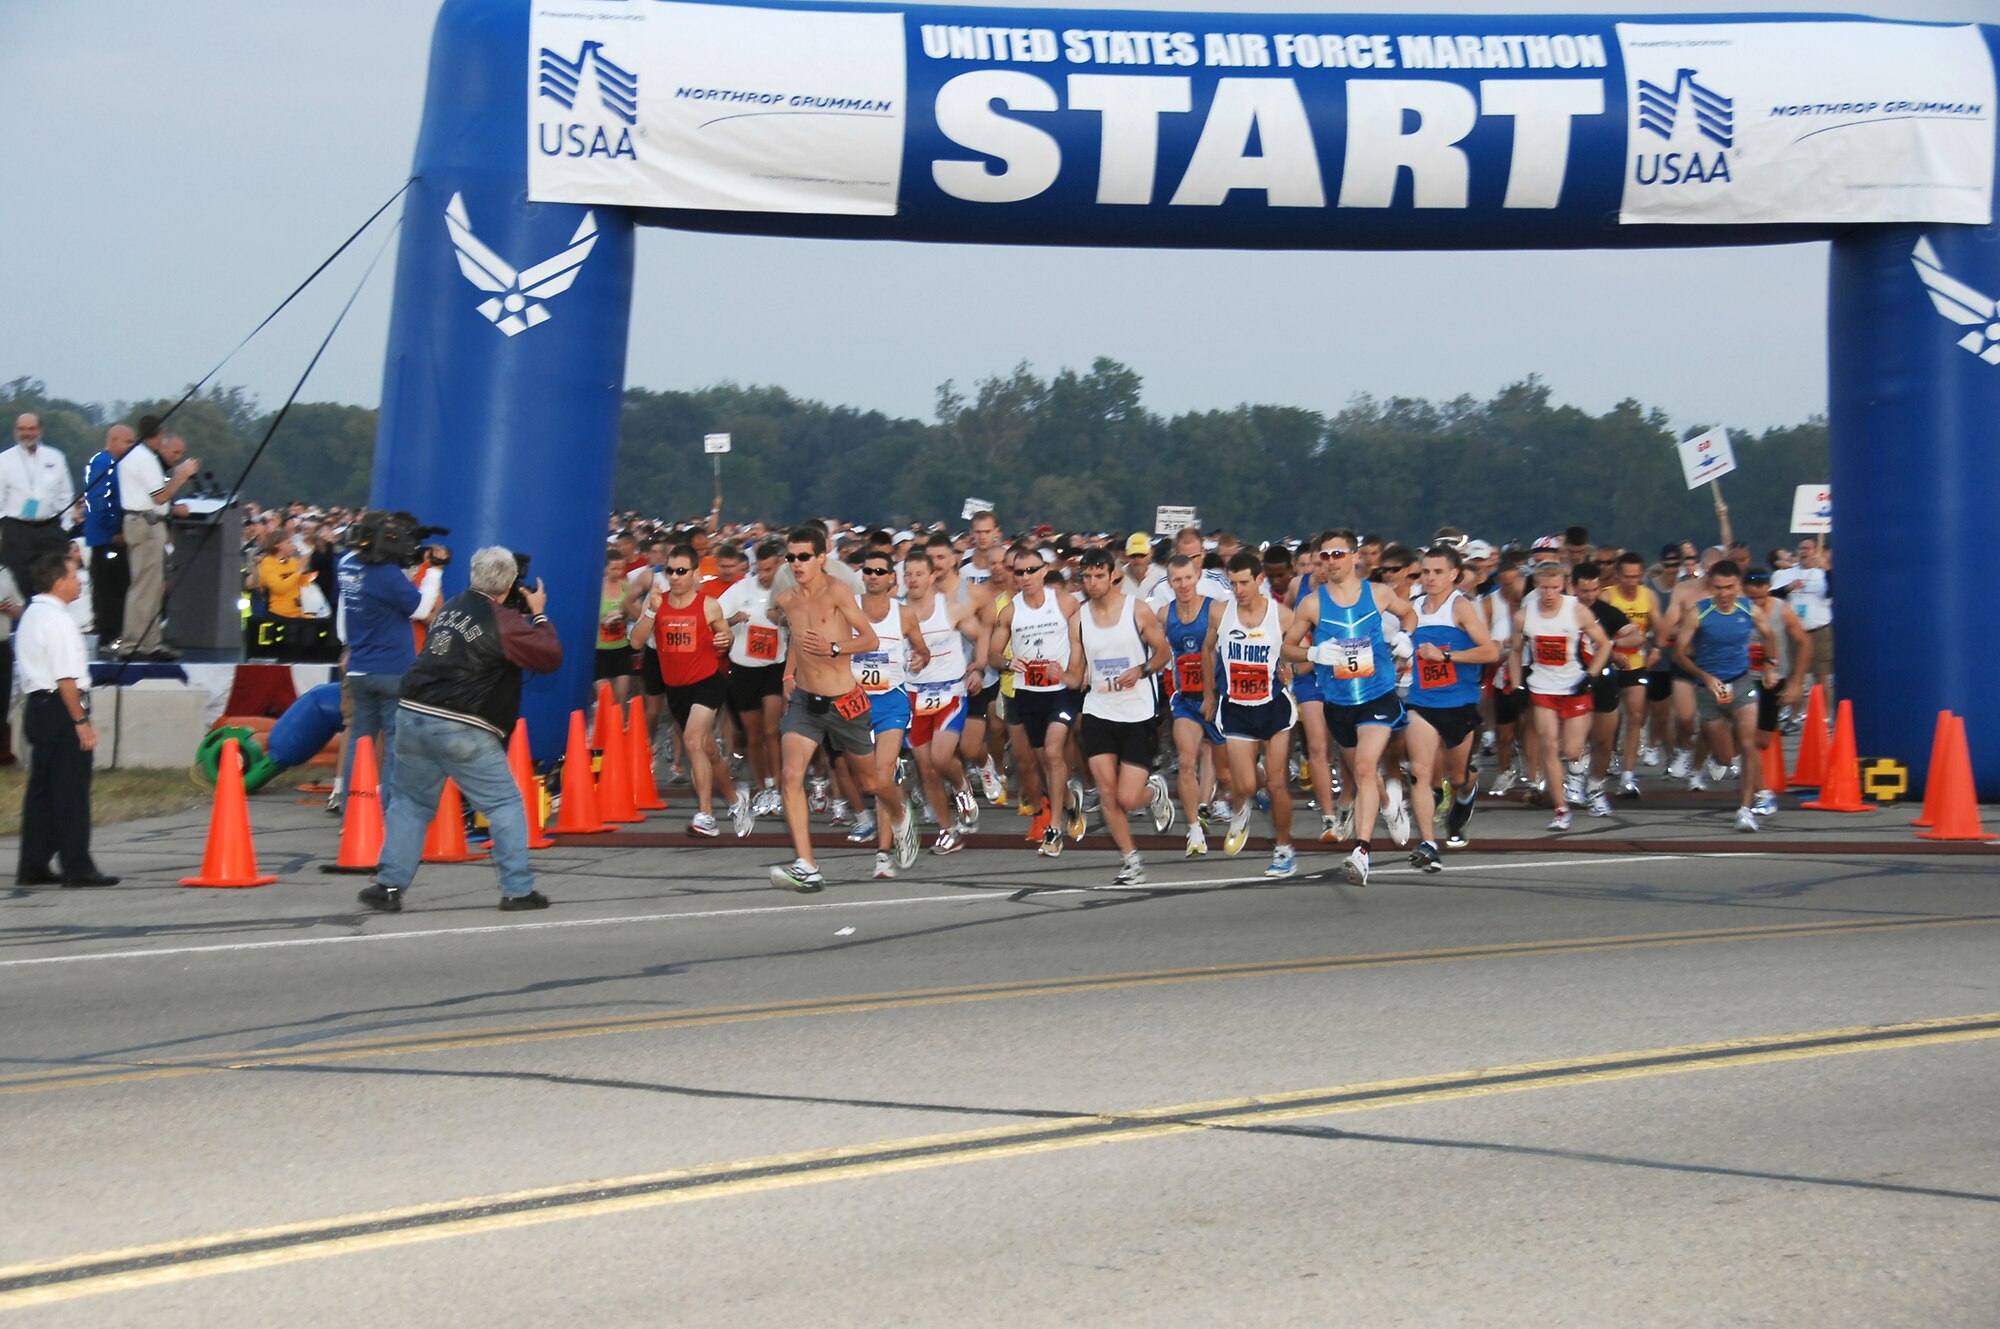 Runners take off at the starting line of the 2009 Air Force Marathon at Wright-Patterson AFB, Ohio, in this file photo. This year's 10,000th runner registered Aug. 12, 2010, meeting a long-standing event goal. (U.S. Air Force photo/Ben Strasser)